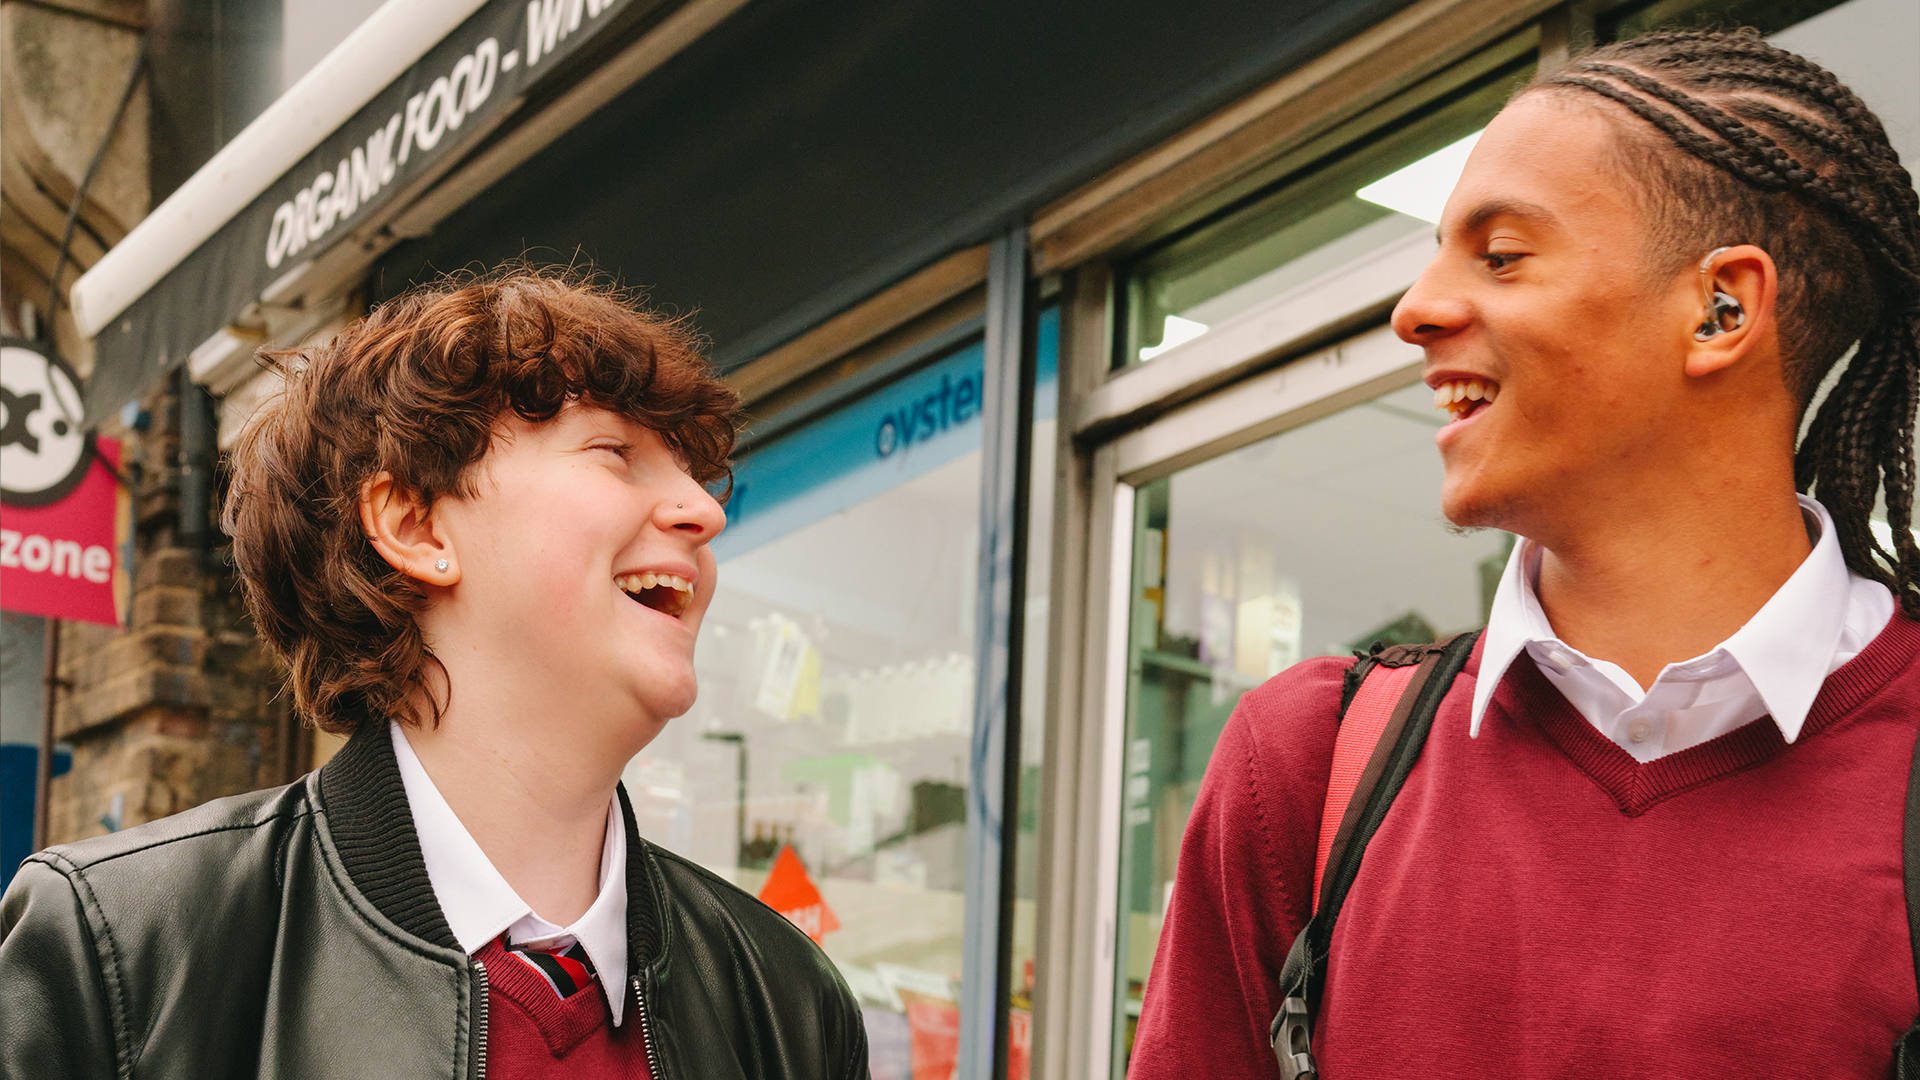 A Black teenage boy wearing a hearing aid laughing with a white non-binary teenager outside the shops.